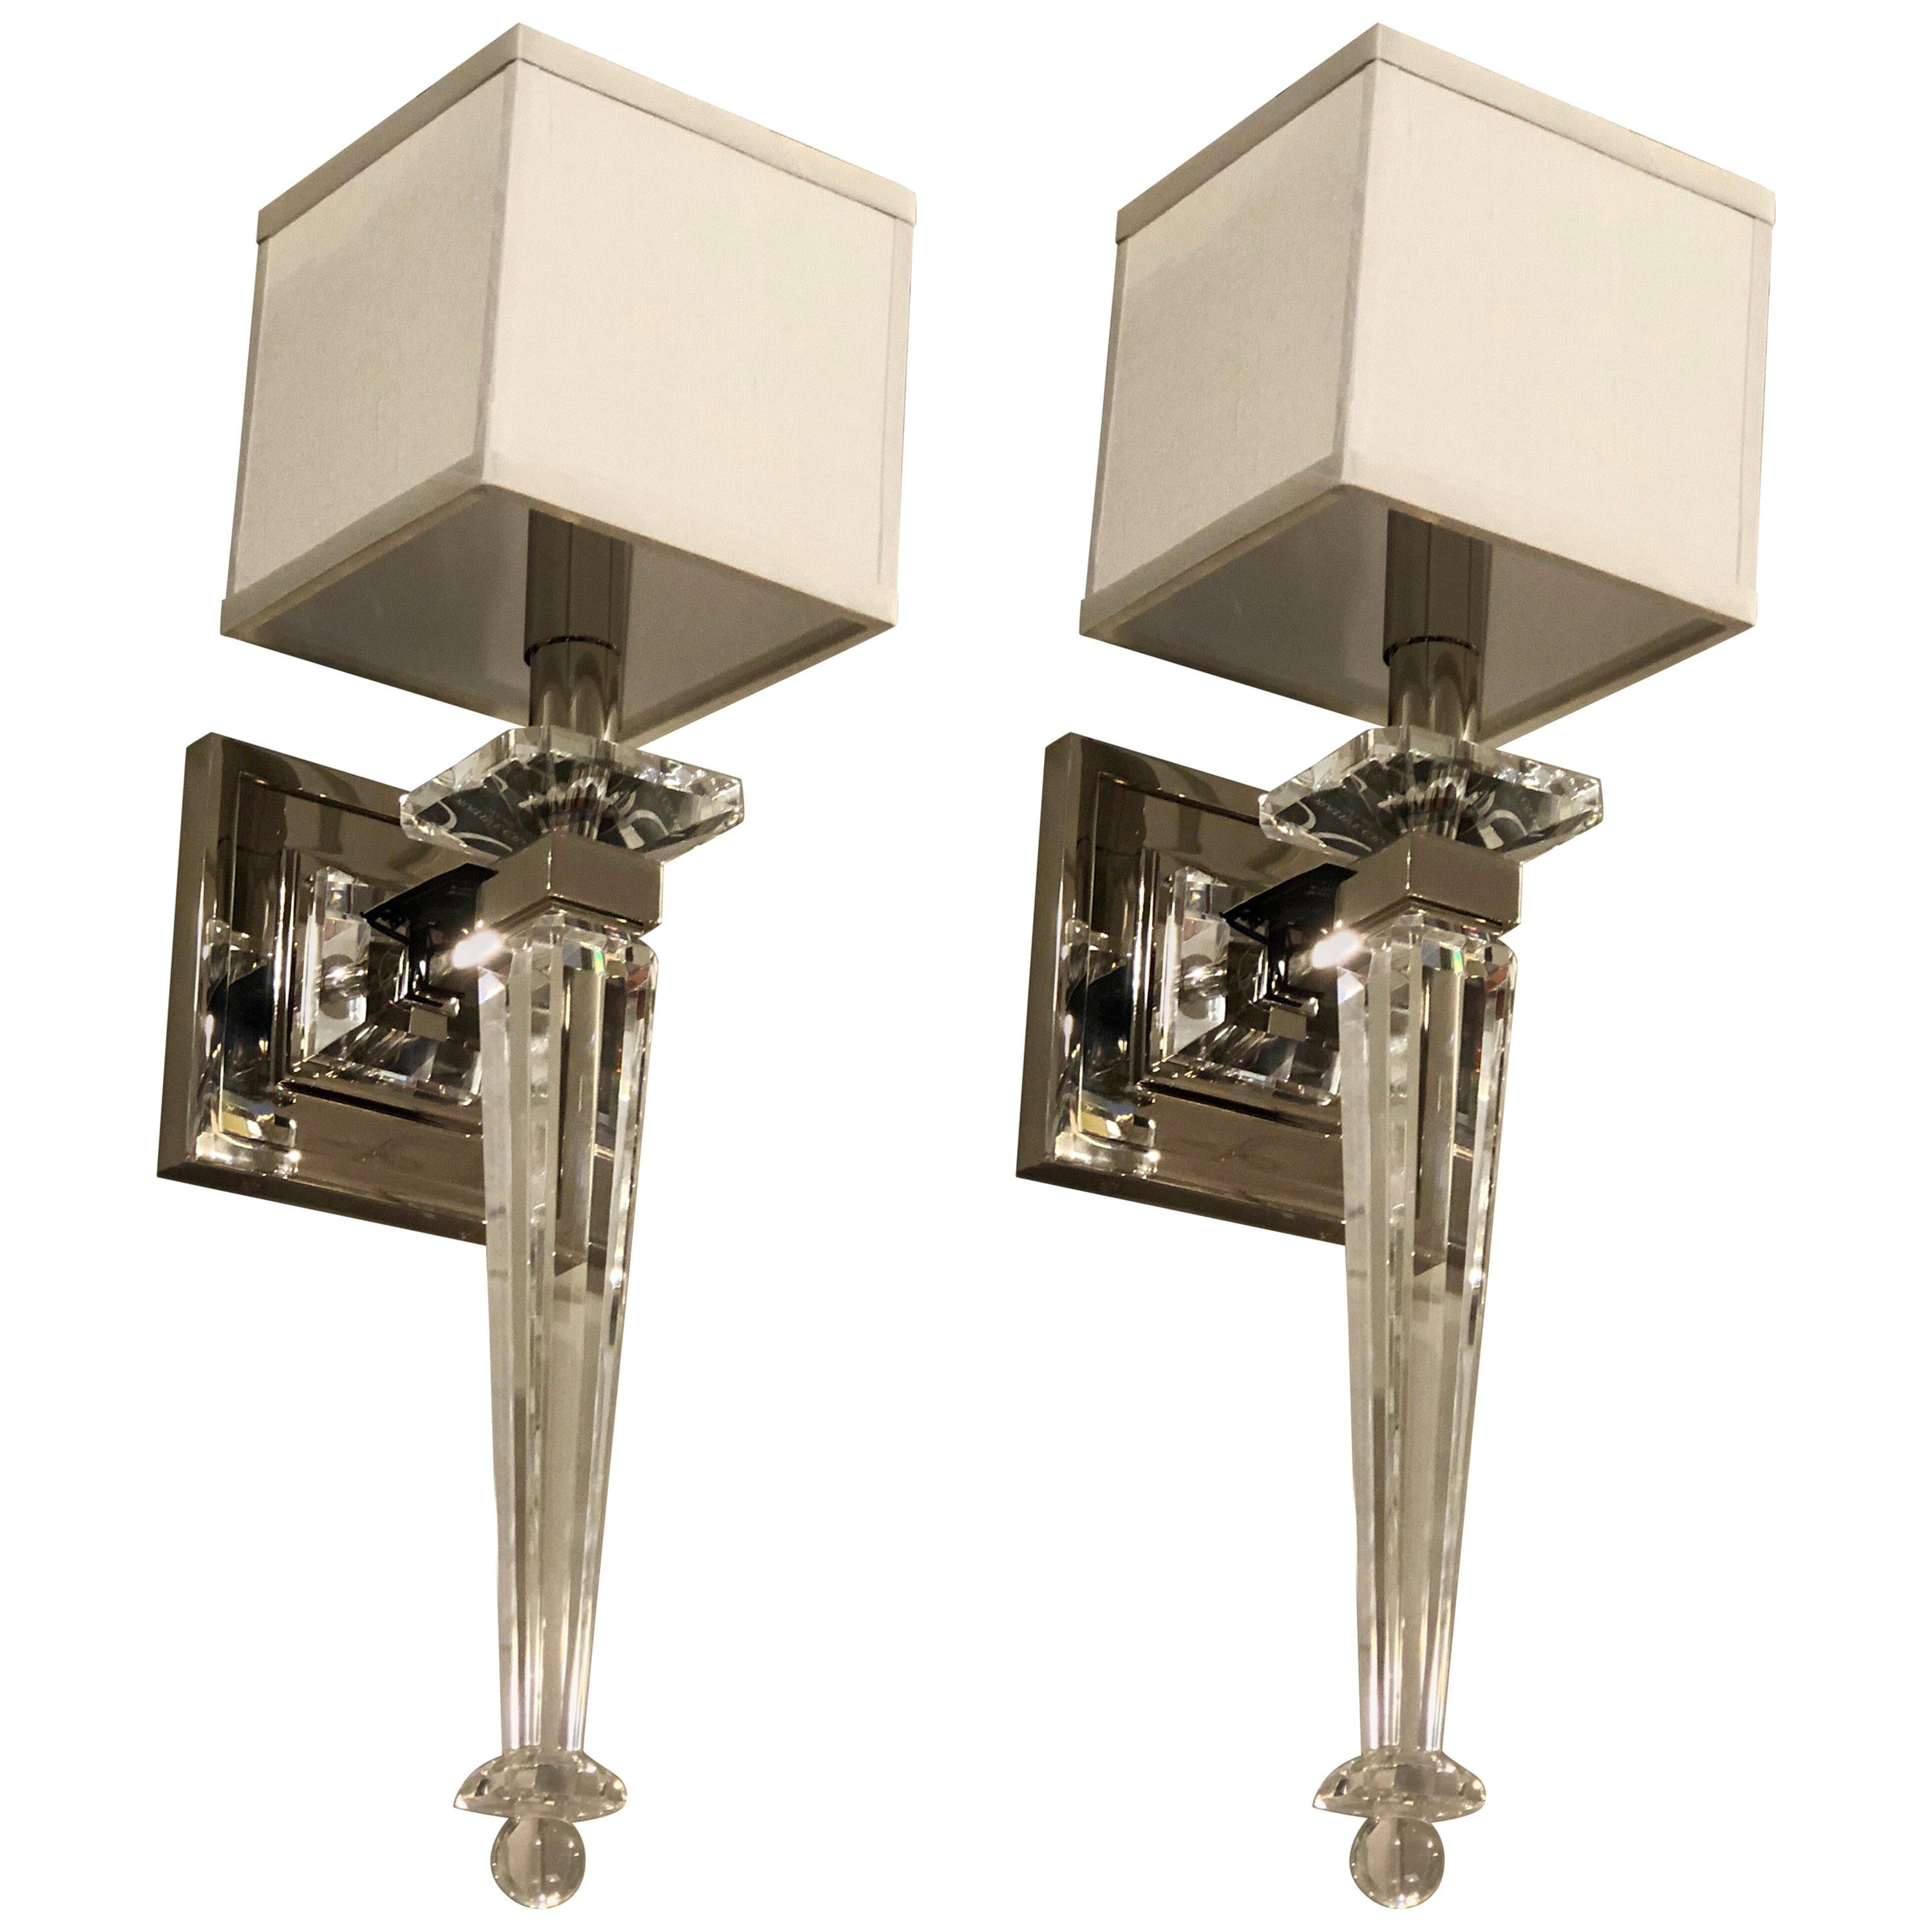 2 Pairs Italian Mid-Century Modern Neoclassical Style Crystal and Nickel Sconces